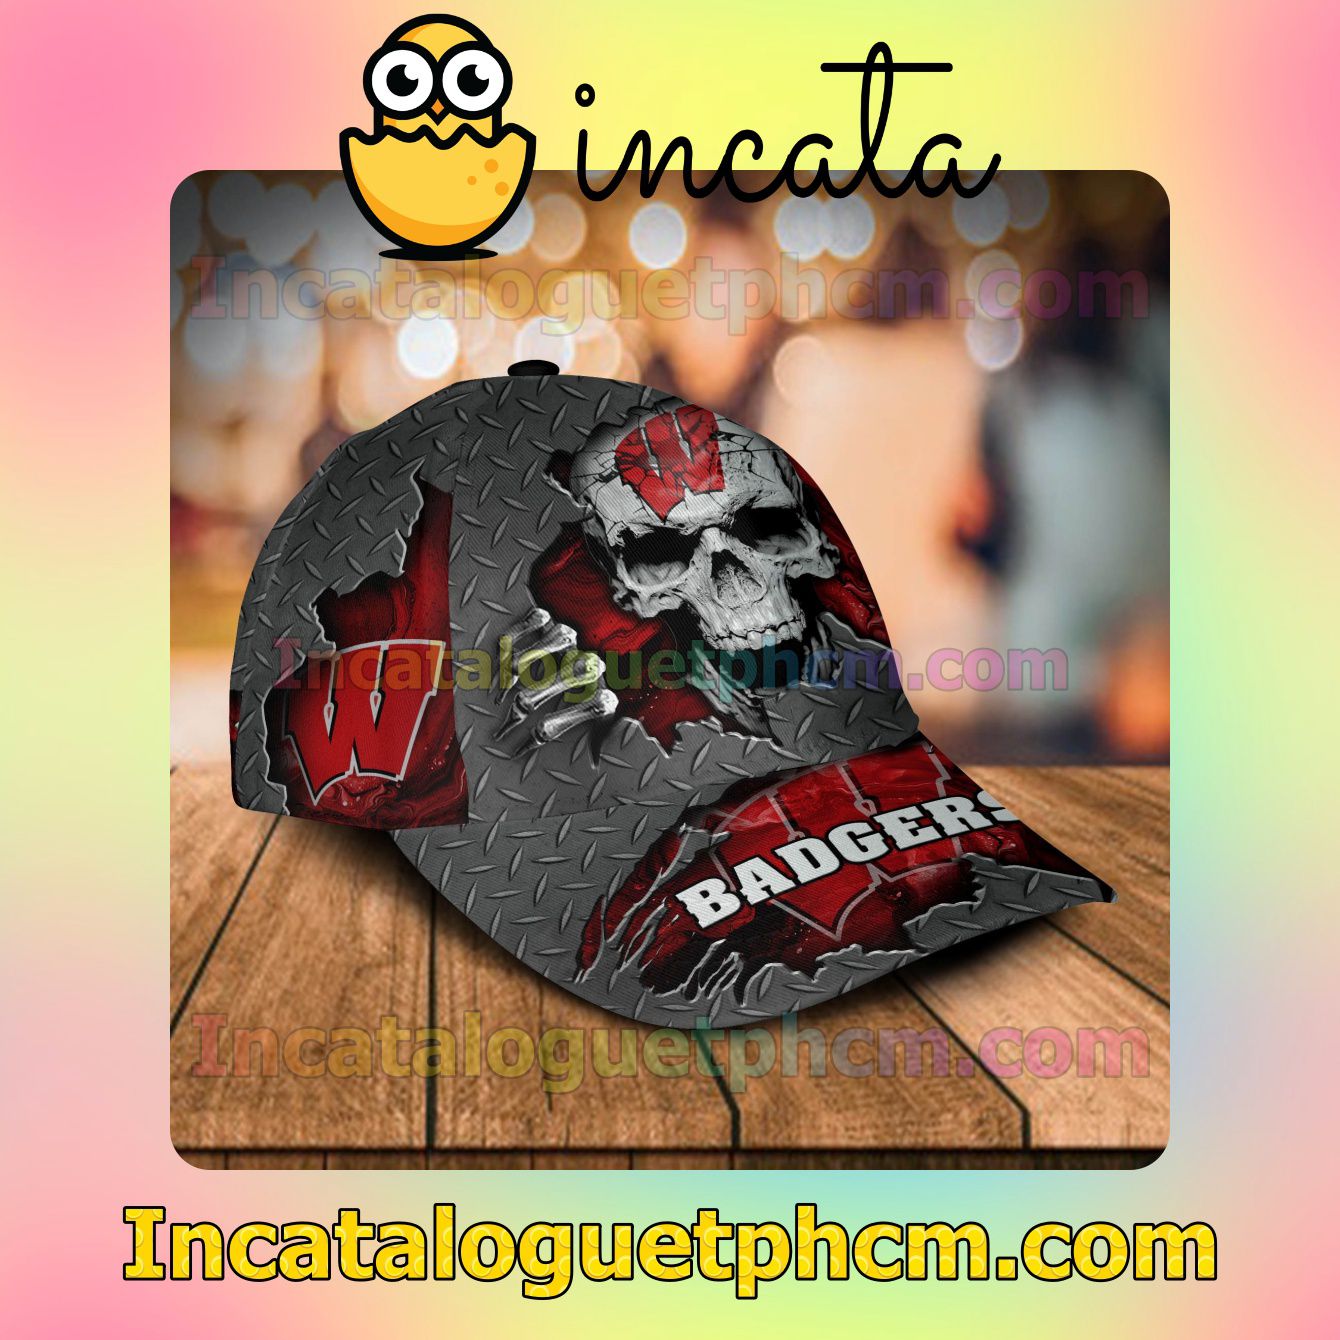 Where To Buy Wisconsin Badgers SKULL NCAA Customized Hat Caps